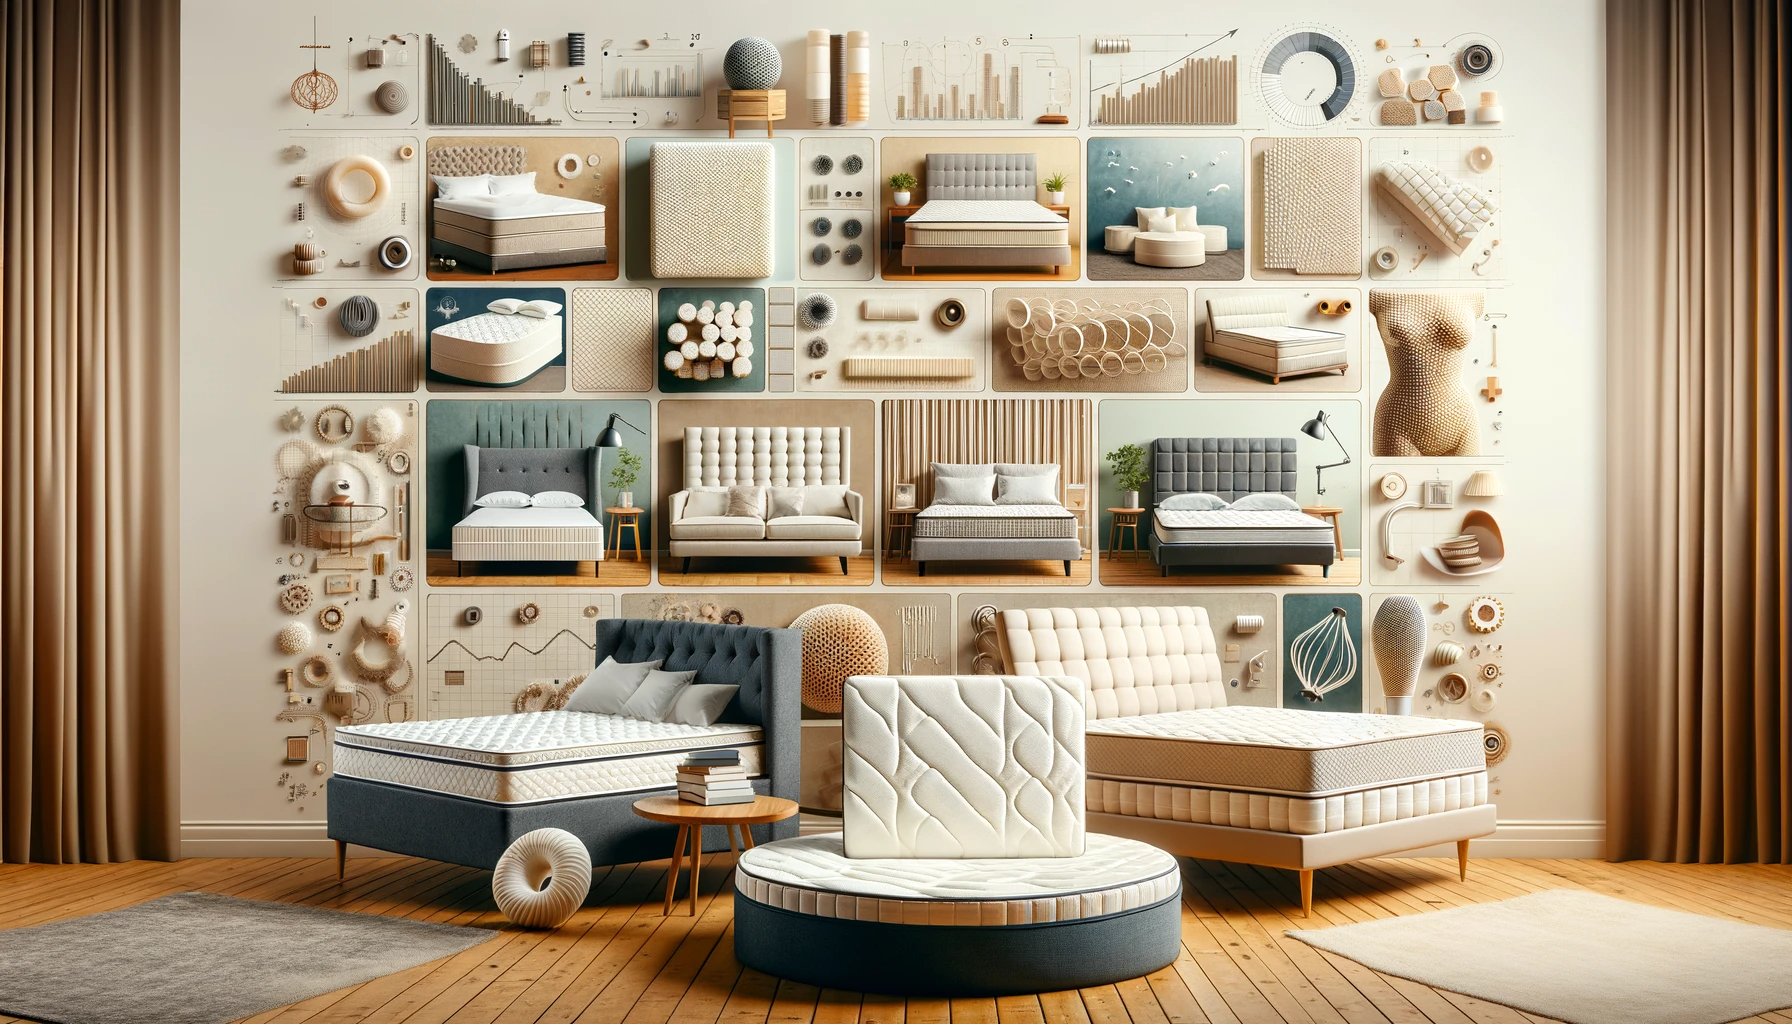 A collage showcasing the rise of customization in mattresses. The image should feature a variety of bespoke mattresses tailored to different personal preferences and needs